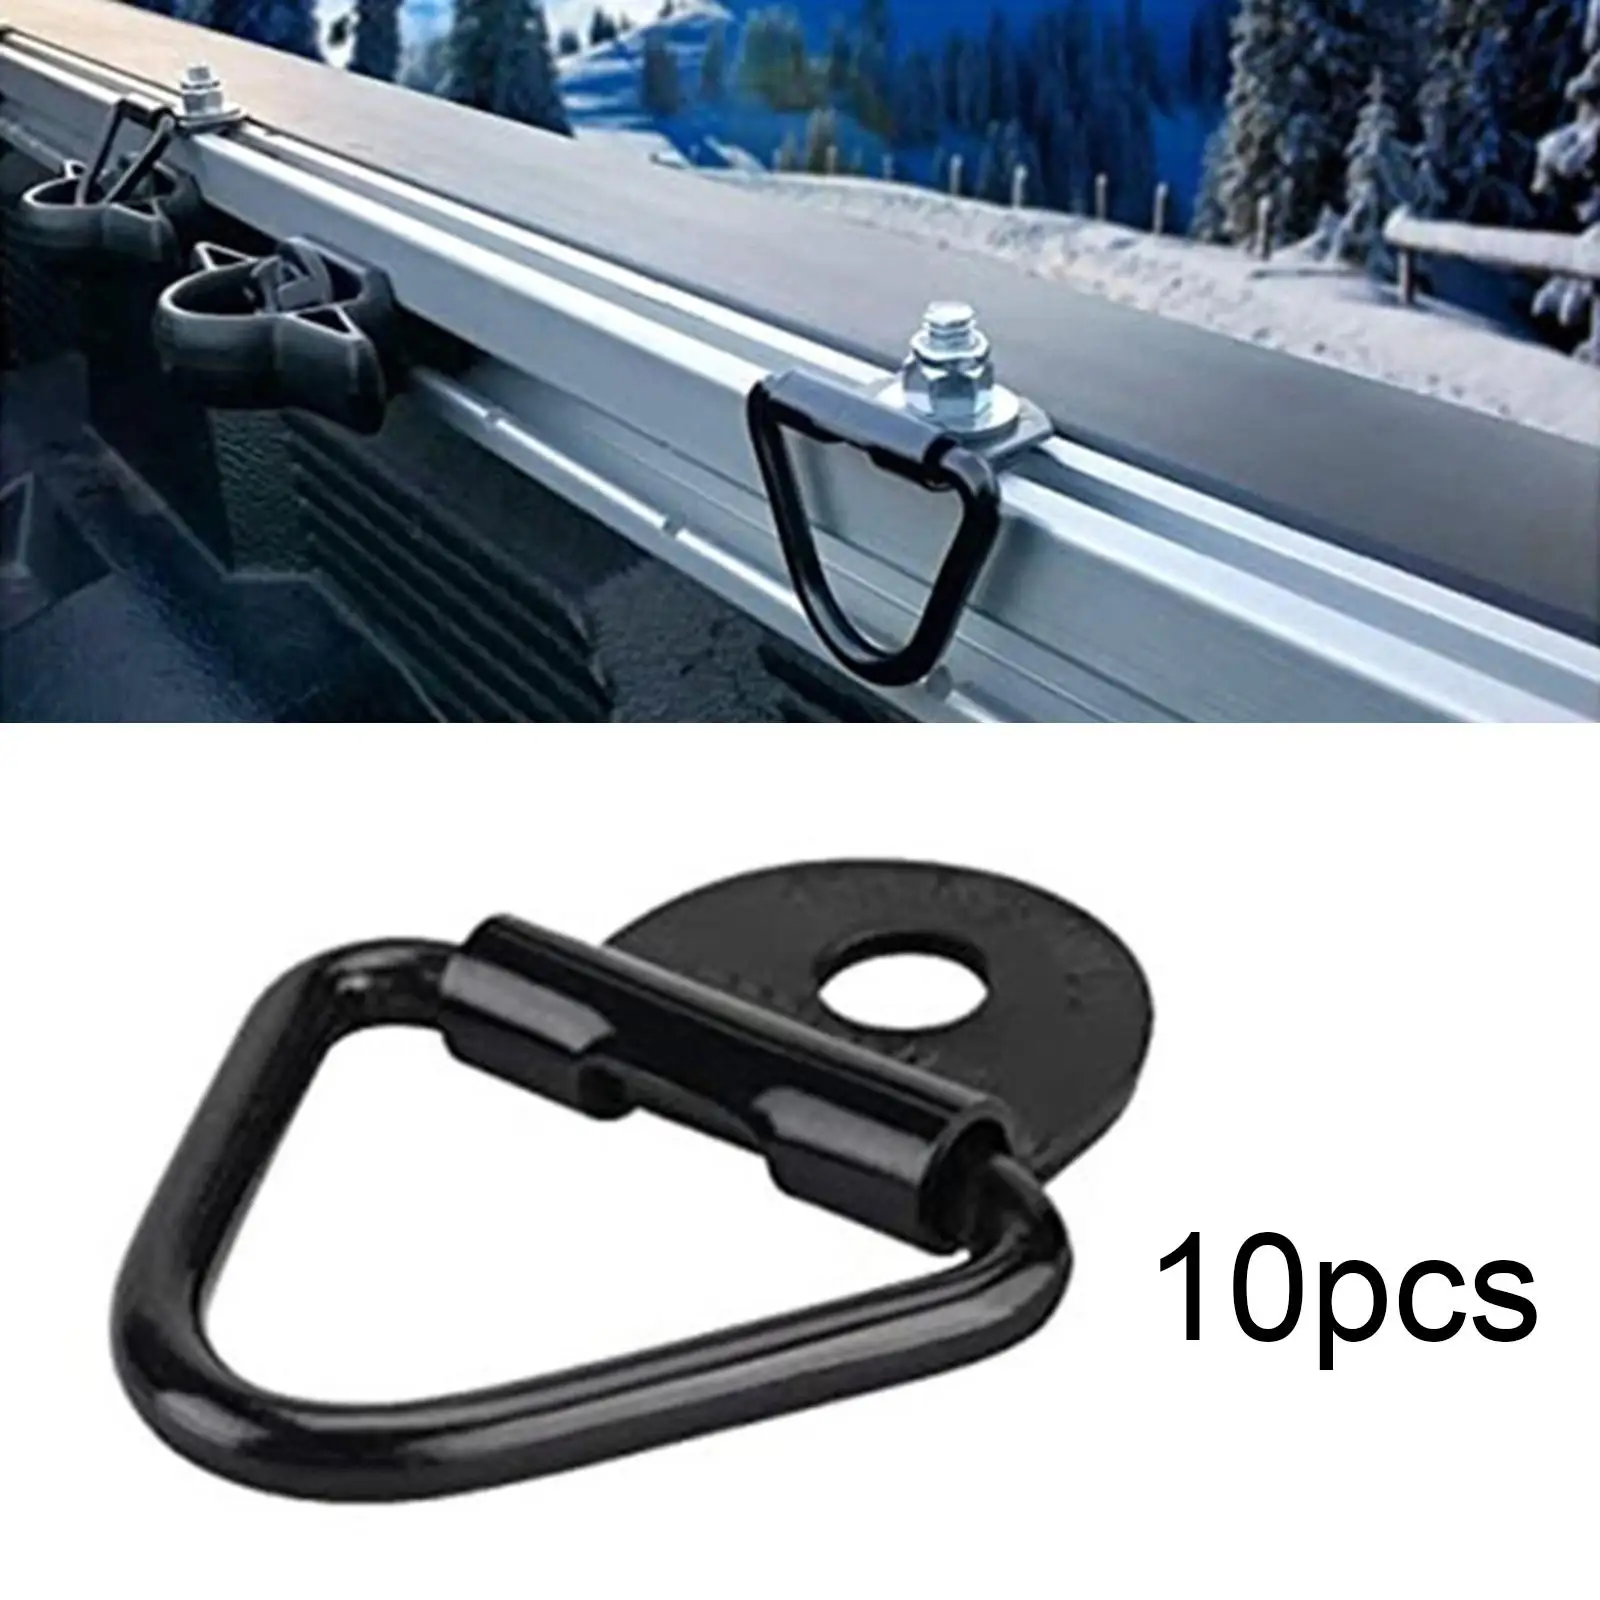 10 Anchors, Stainless Steel Pull Hook   Lashing  for SUV Vehicles Car  RV